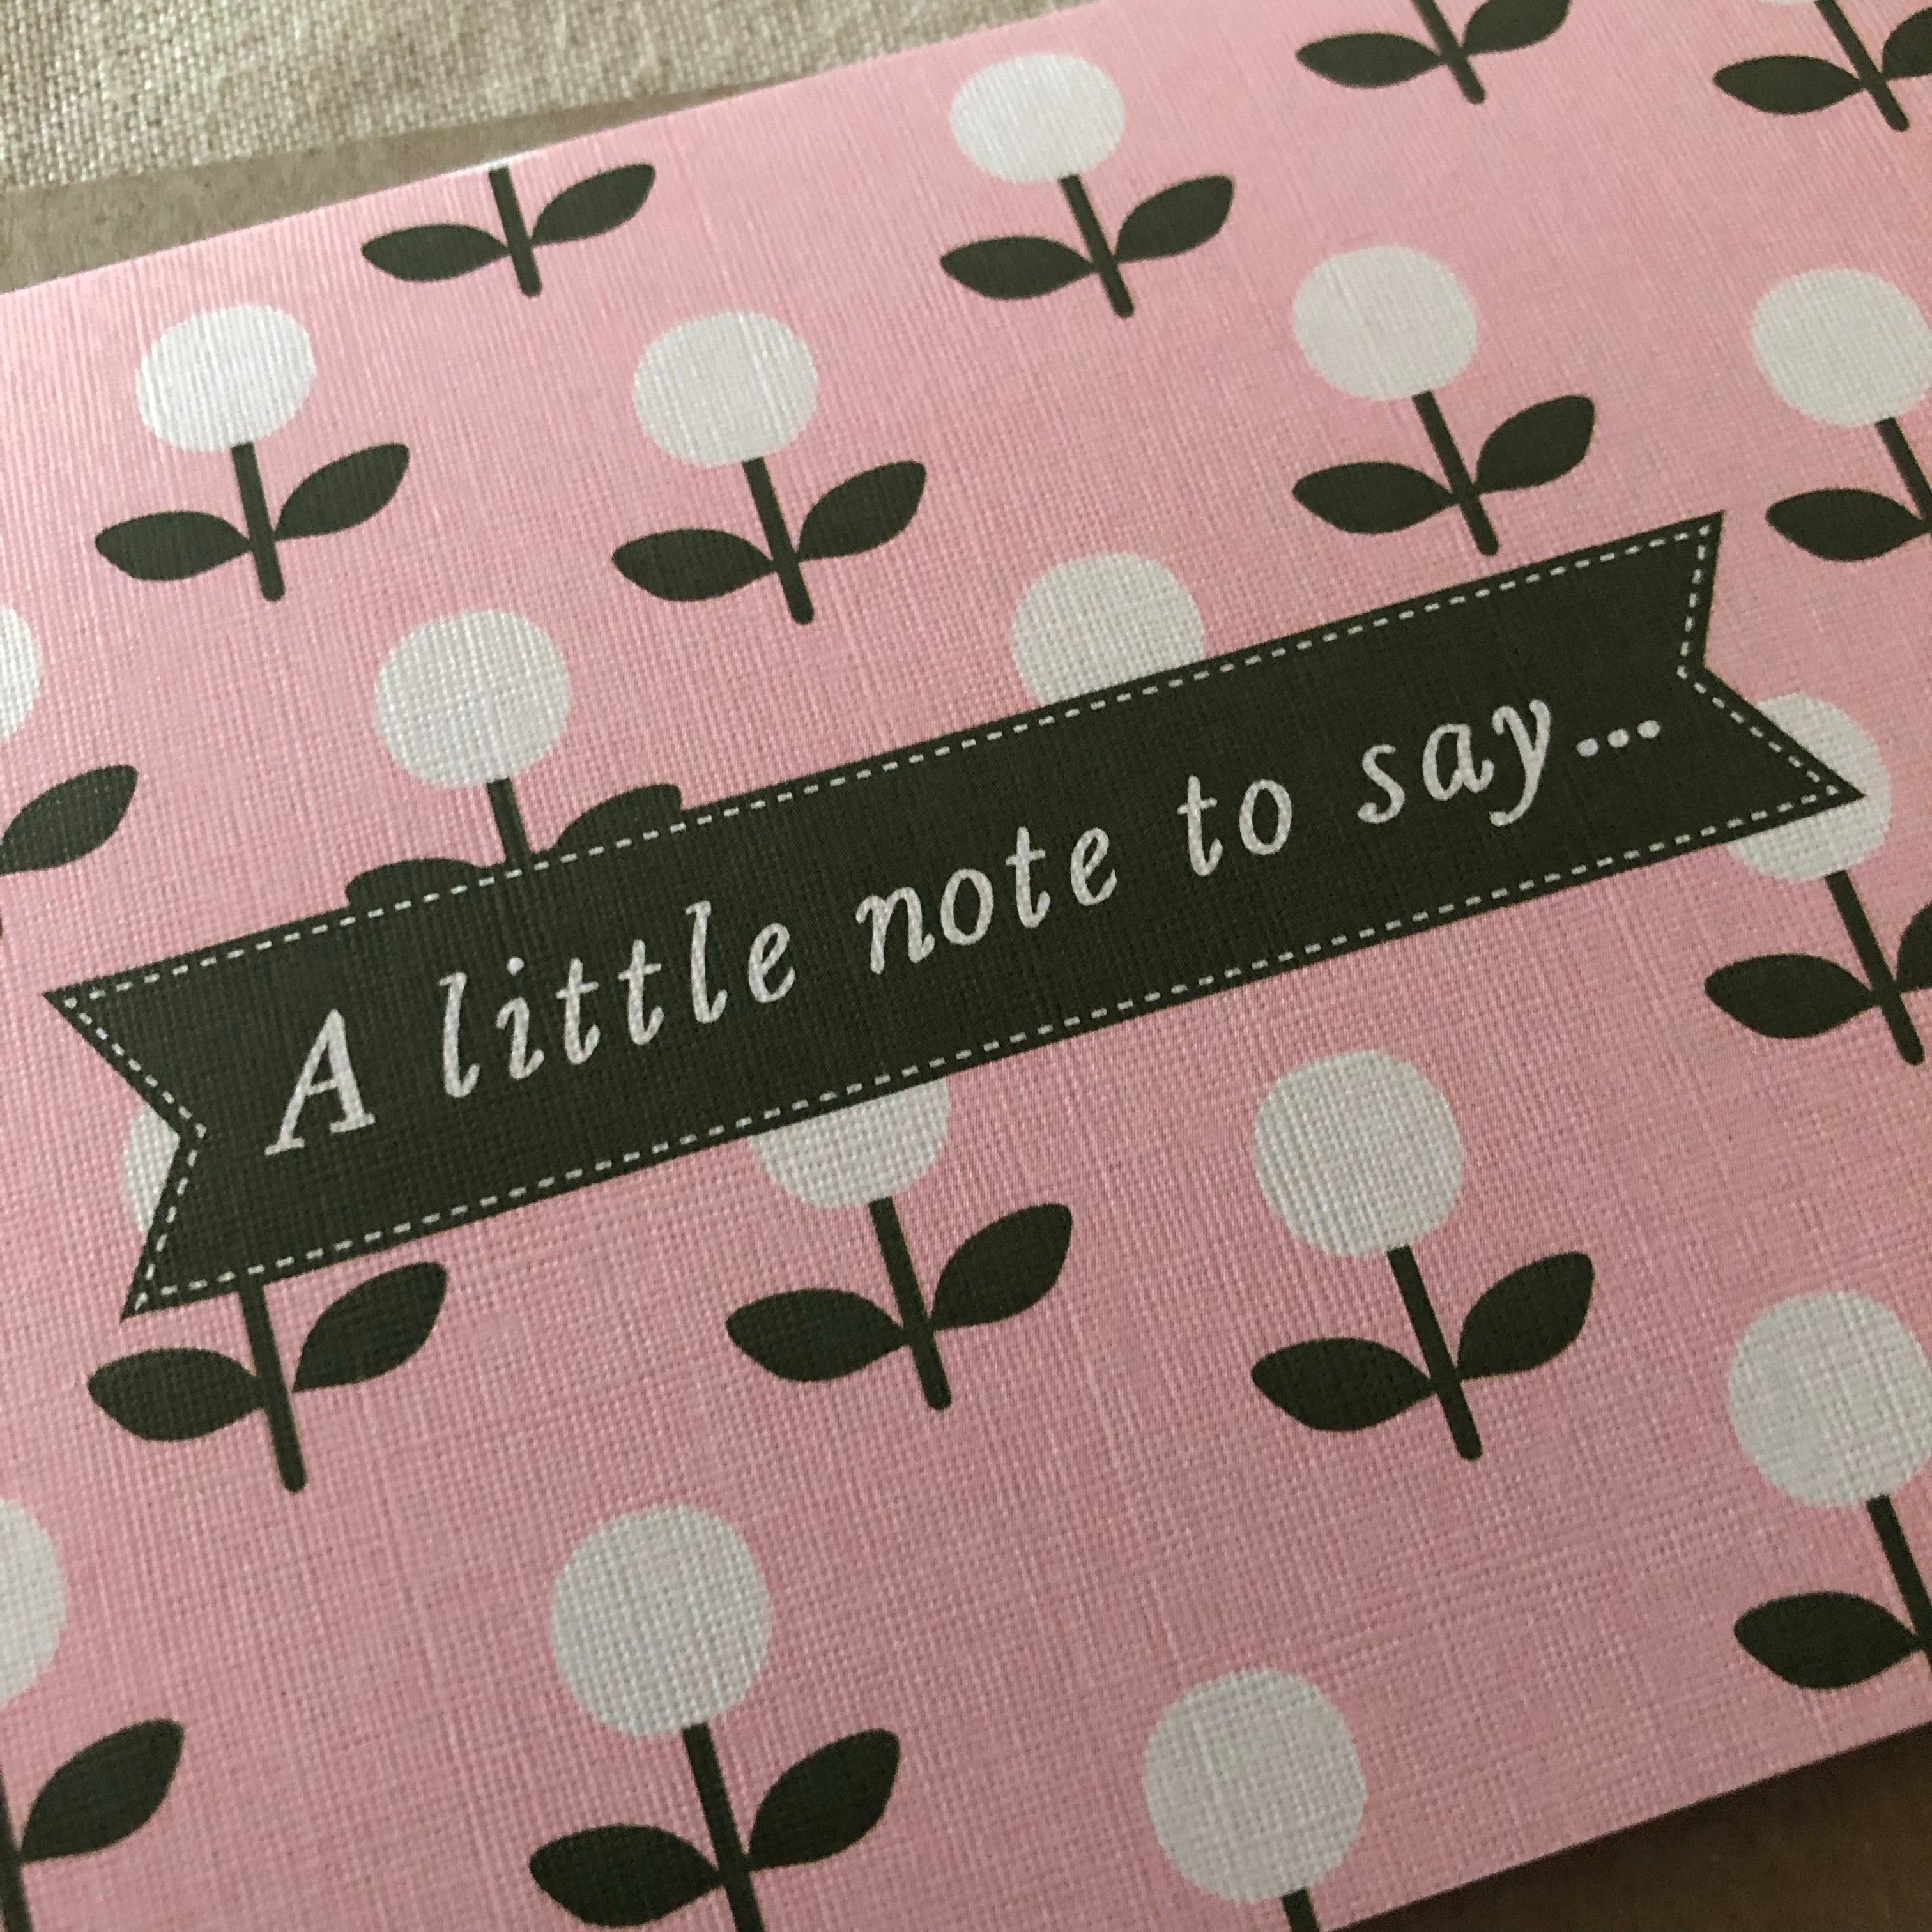 A Little Note to Say Card